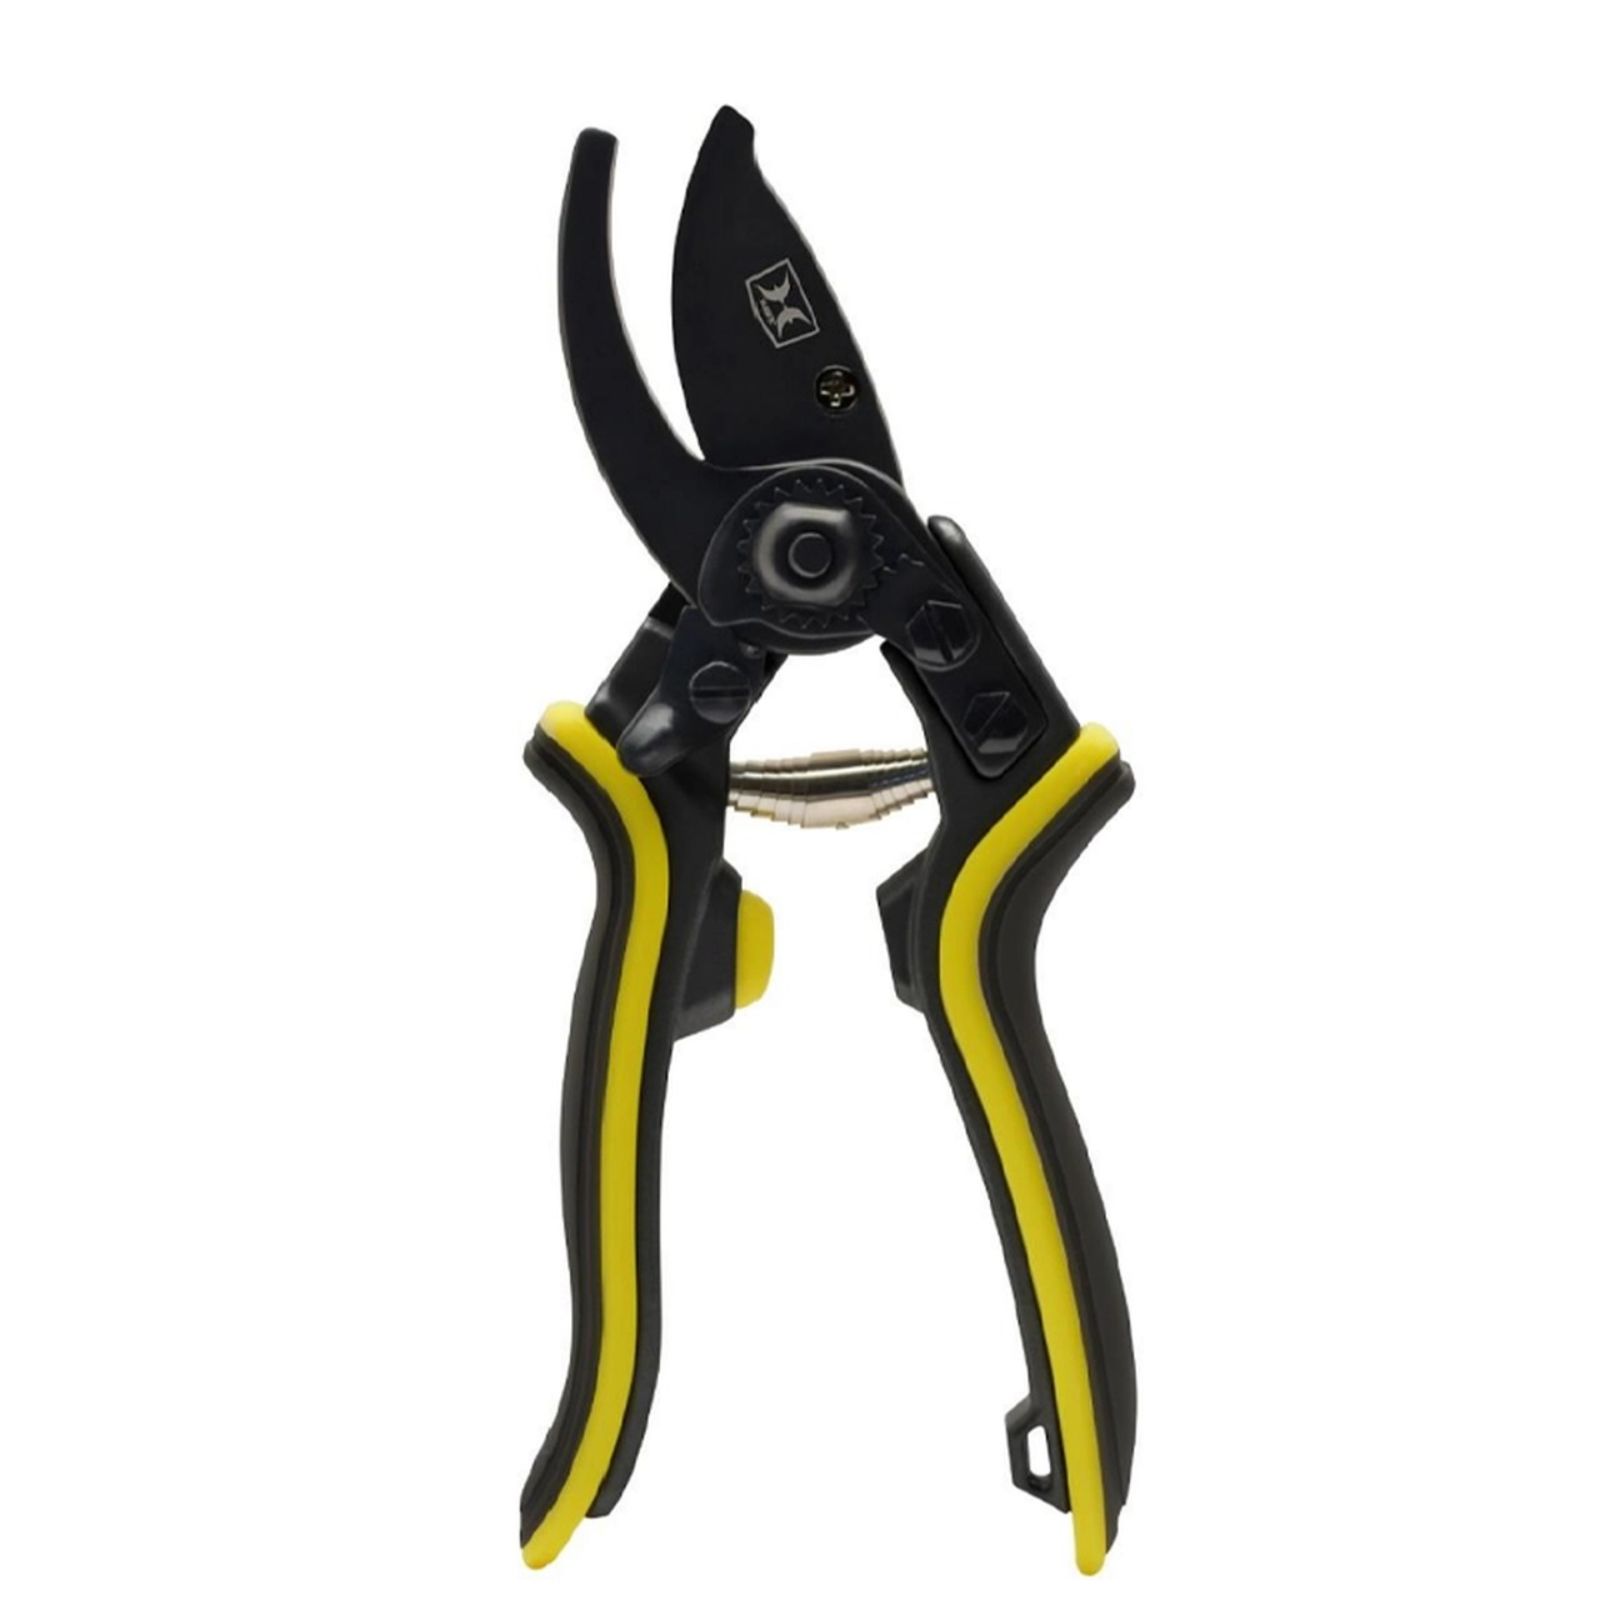 The Hawk Hand Pruner features an aluminum frame and ergonomic yellow rubber grip with an SK5 high carbon steel blade. The black titanium nitride finish allows for corrosion resistance. This hand prune...